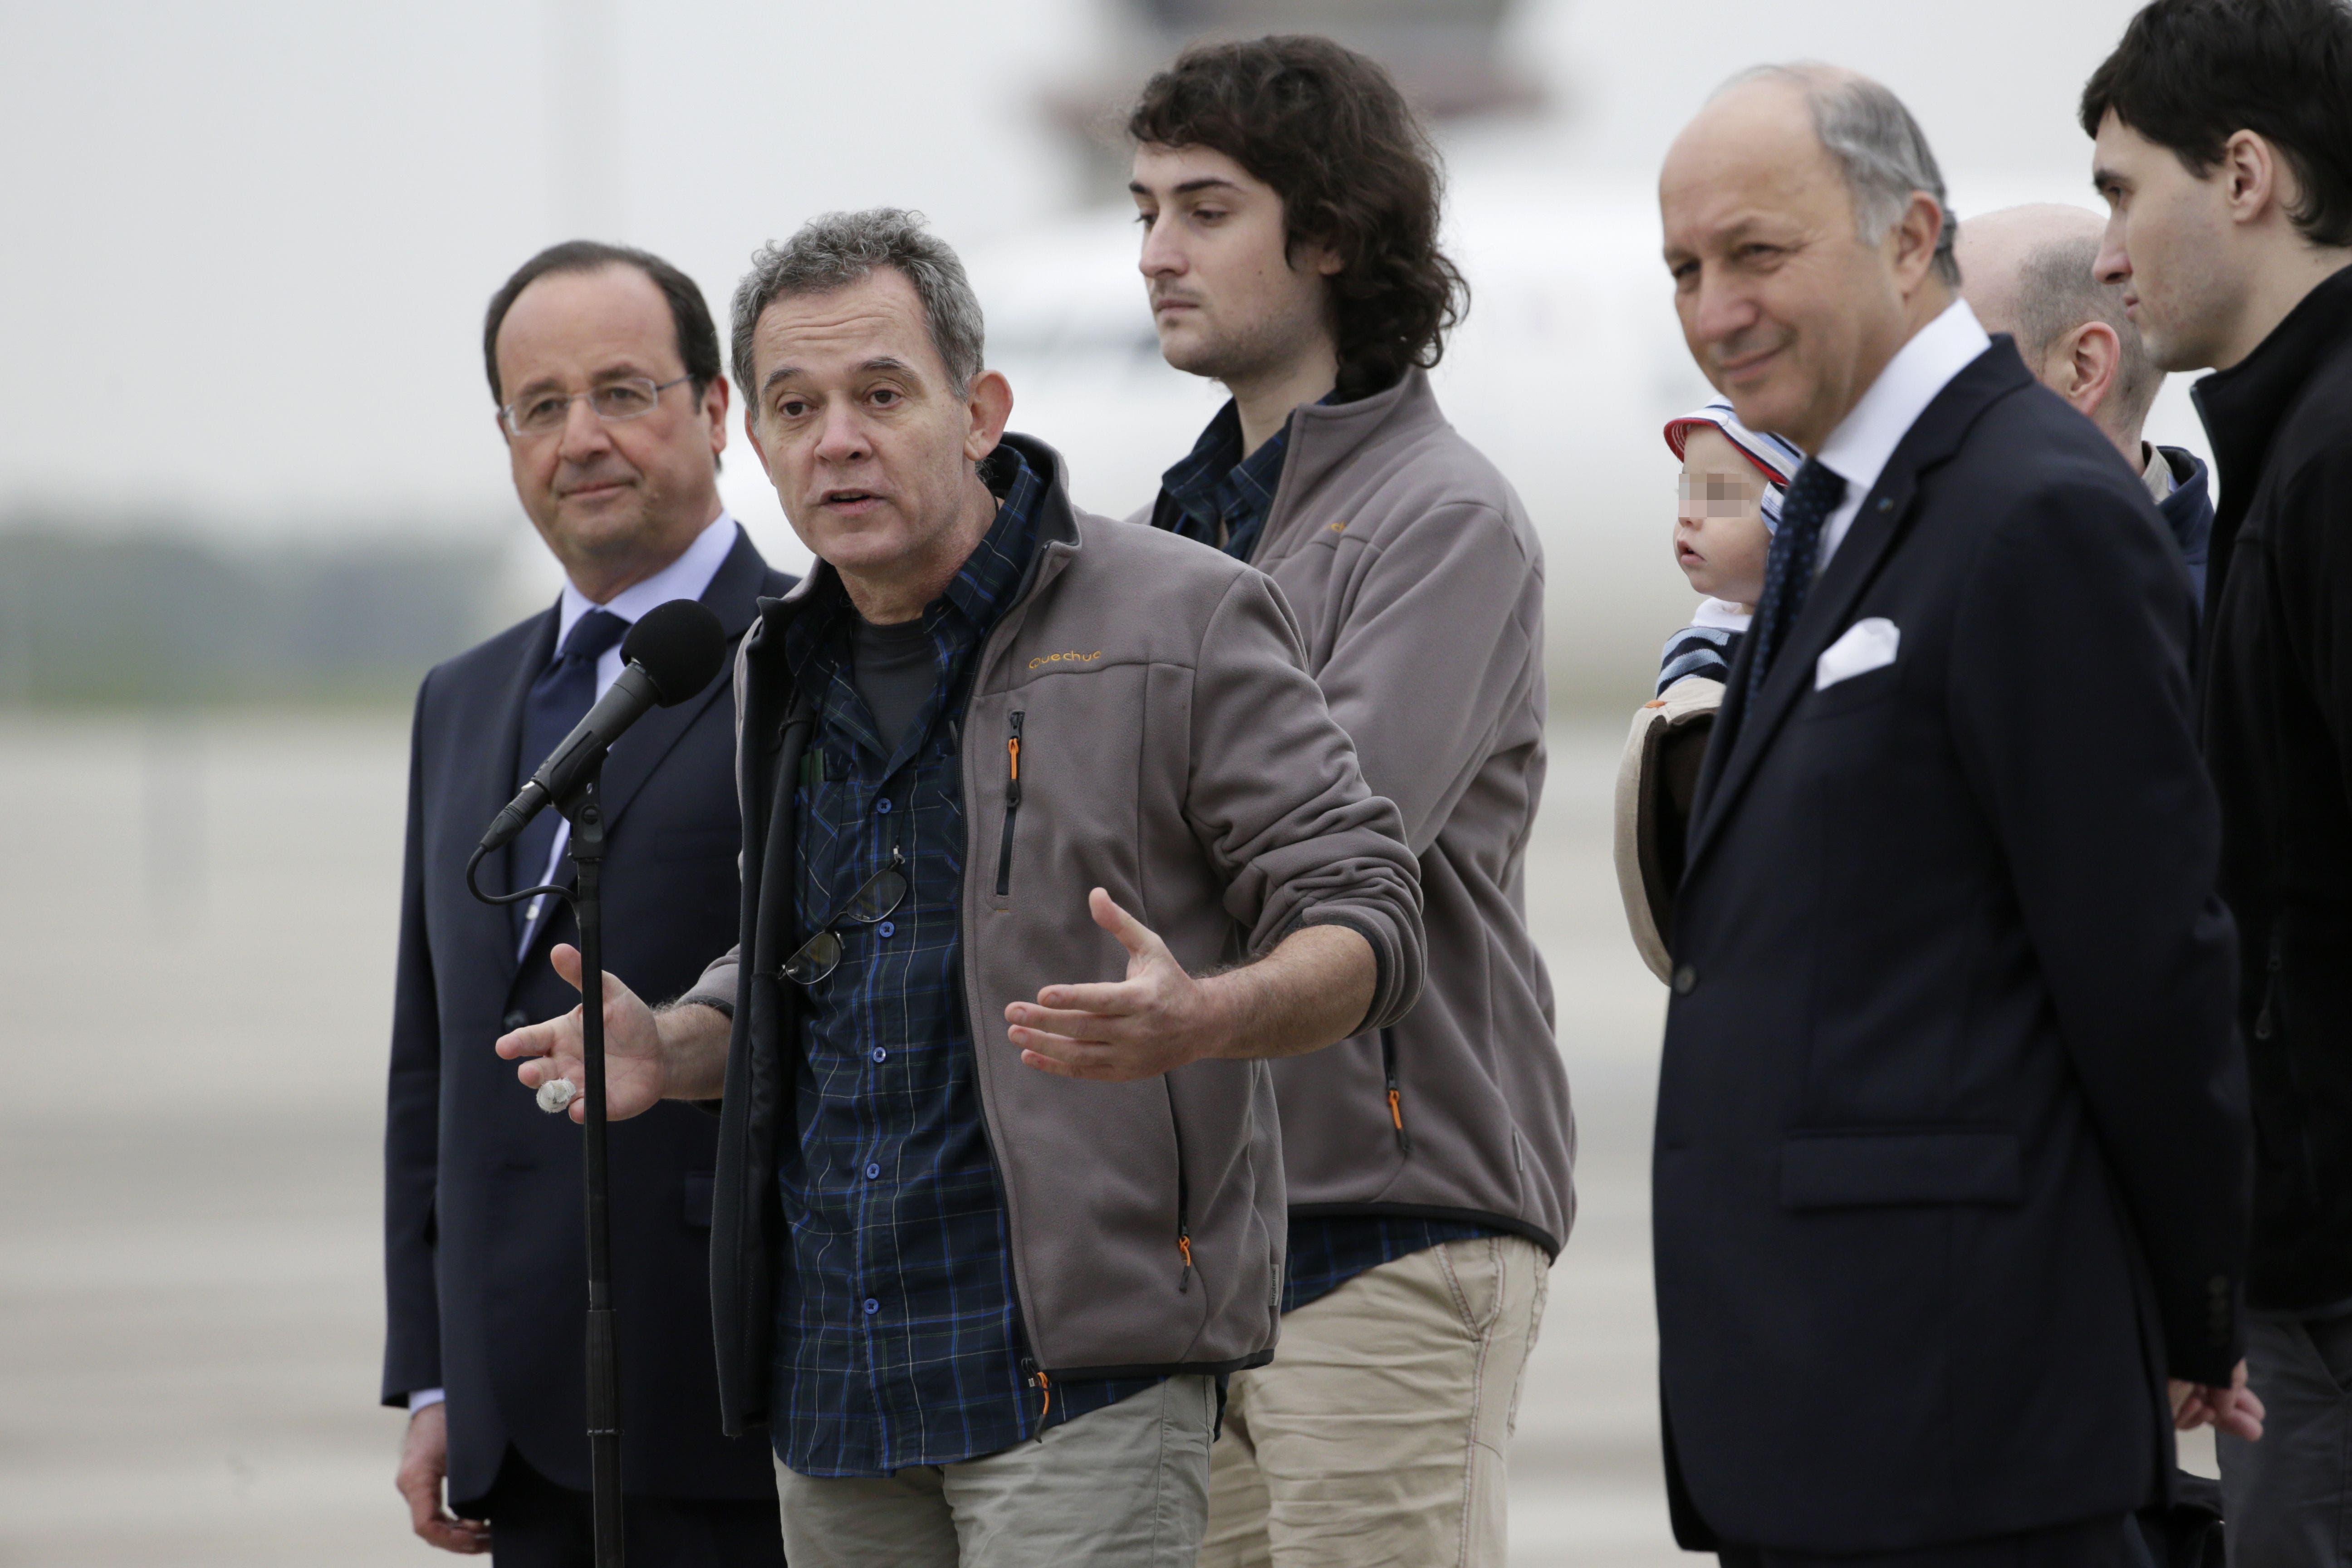 French journalists freed from Syria captivity